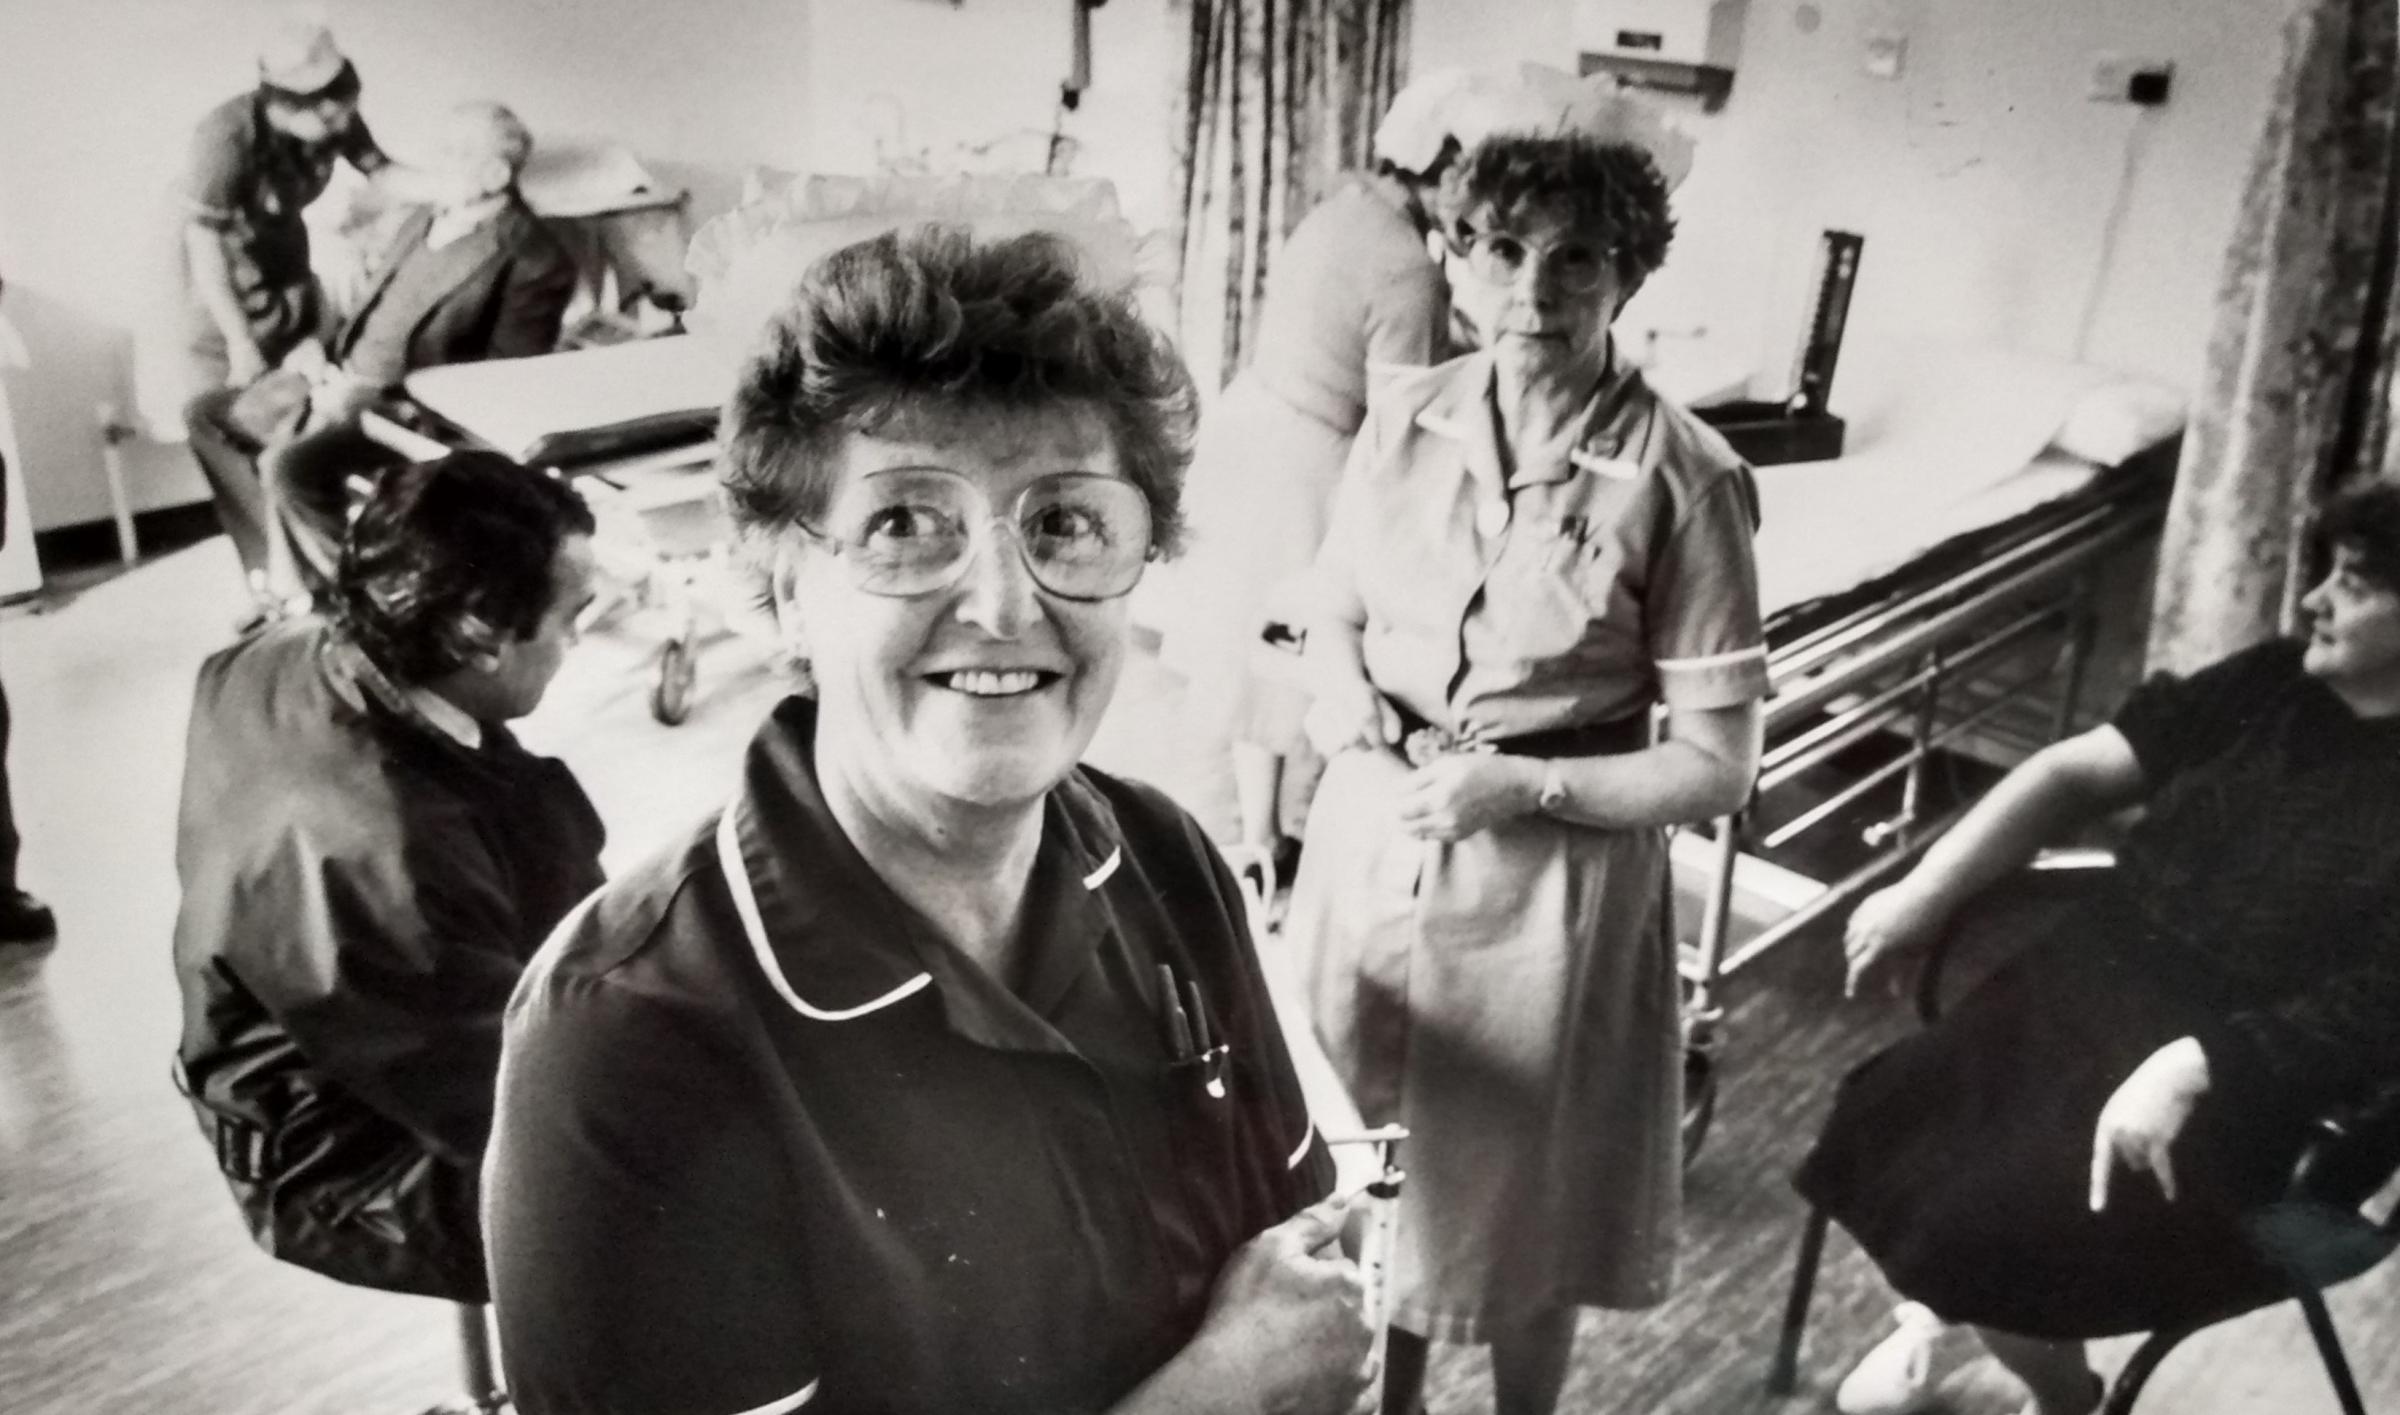 It’s October 1986 and sister Jean Lowe is in charge of the busy casualty unit at Briar Close hospital as the row hotted up over plans to close and transfer it as a GP-managed unit only to Avonside... 